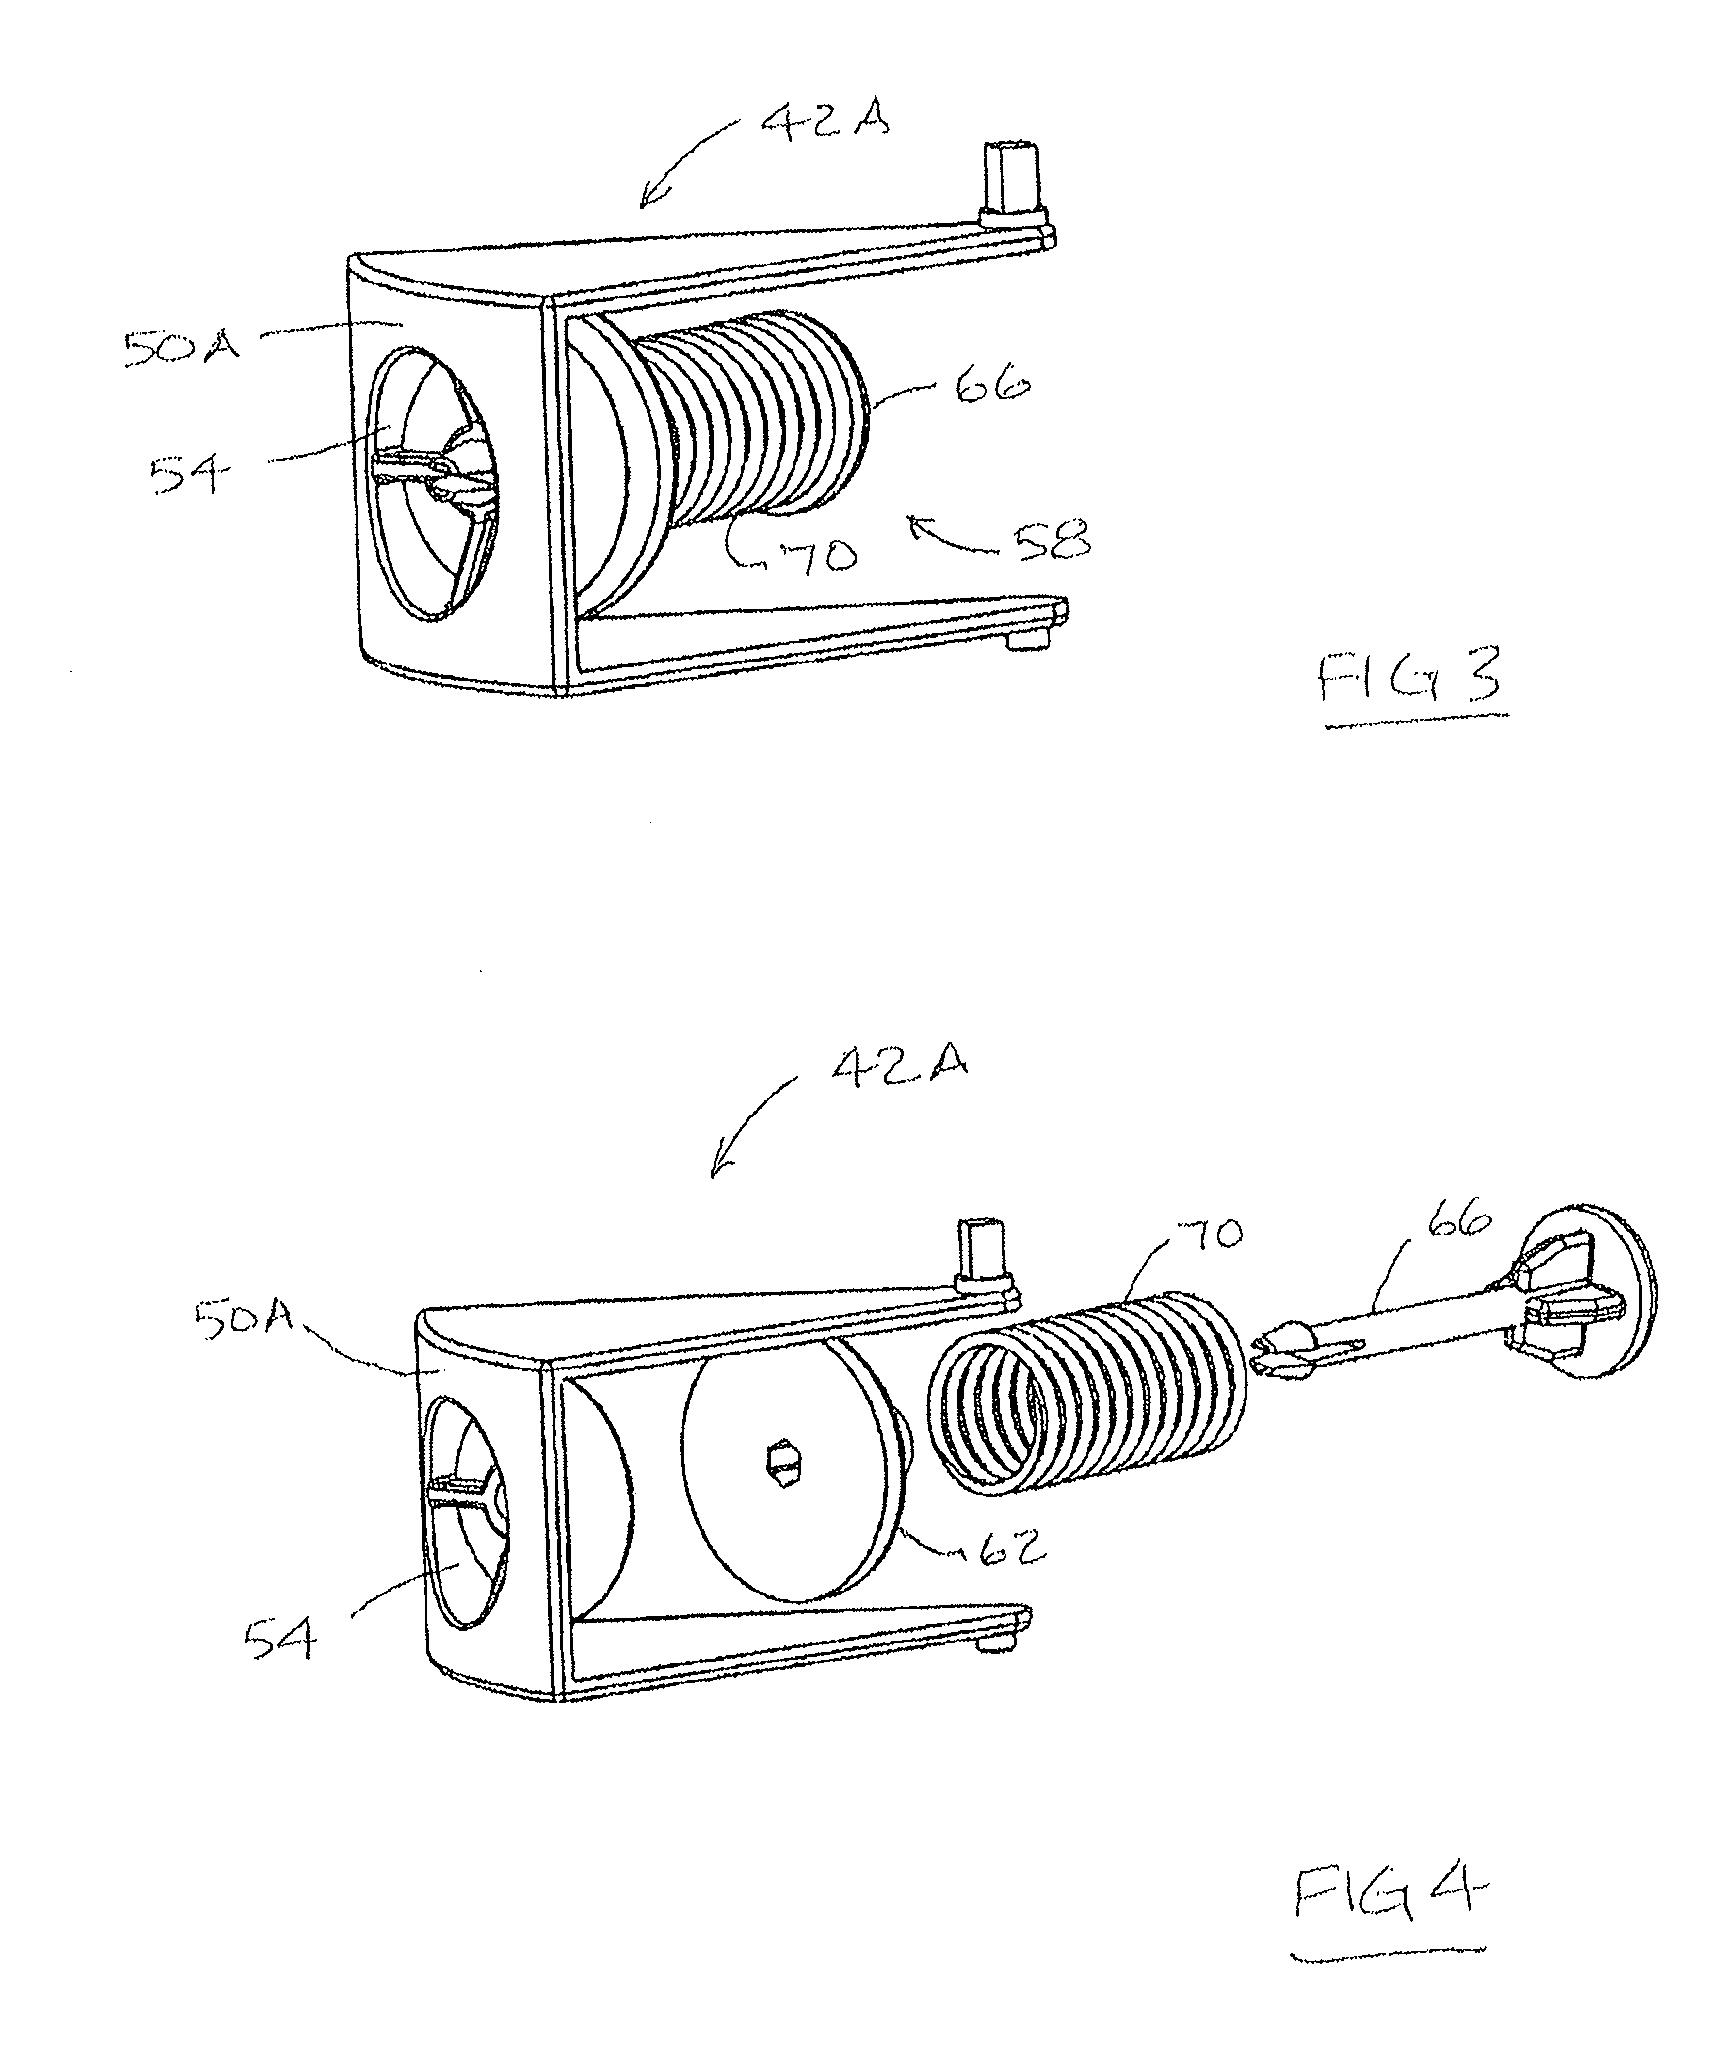 Systems, assemblies, and methods of reducing head loss in heating devices